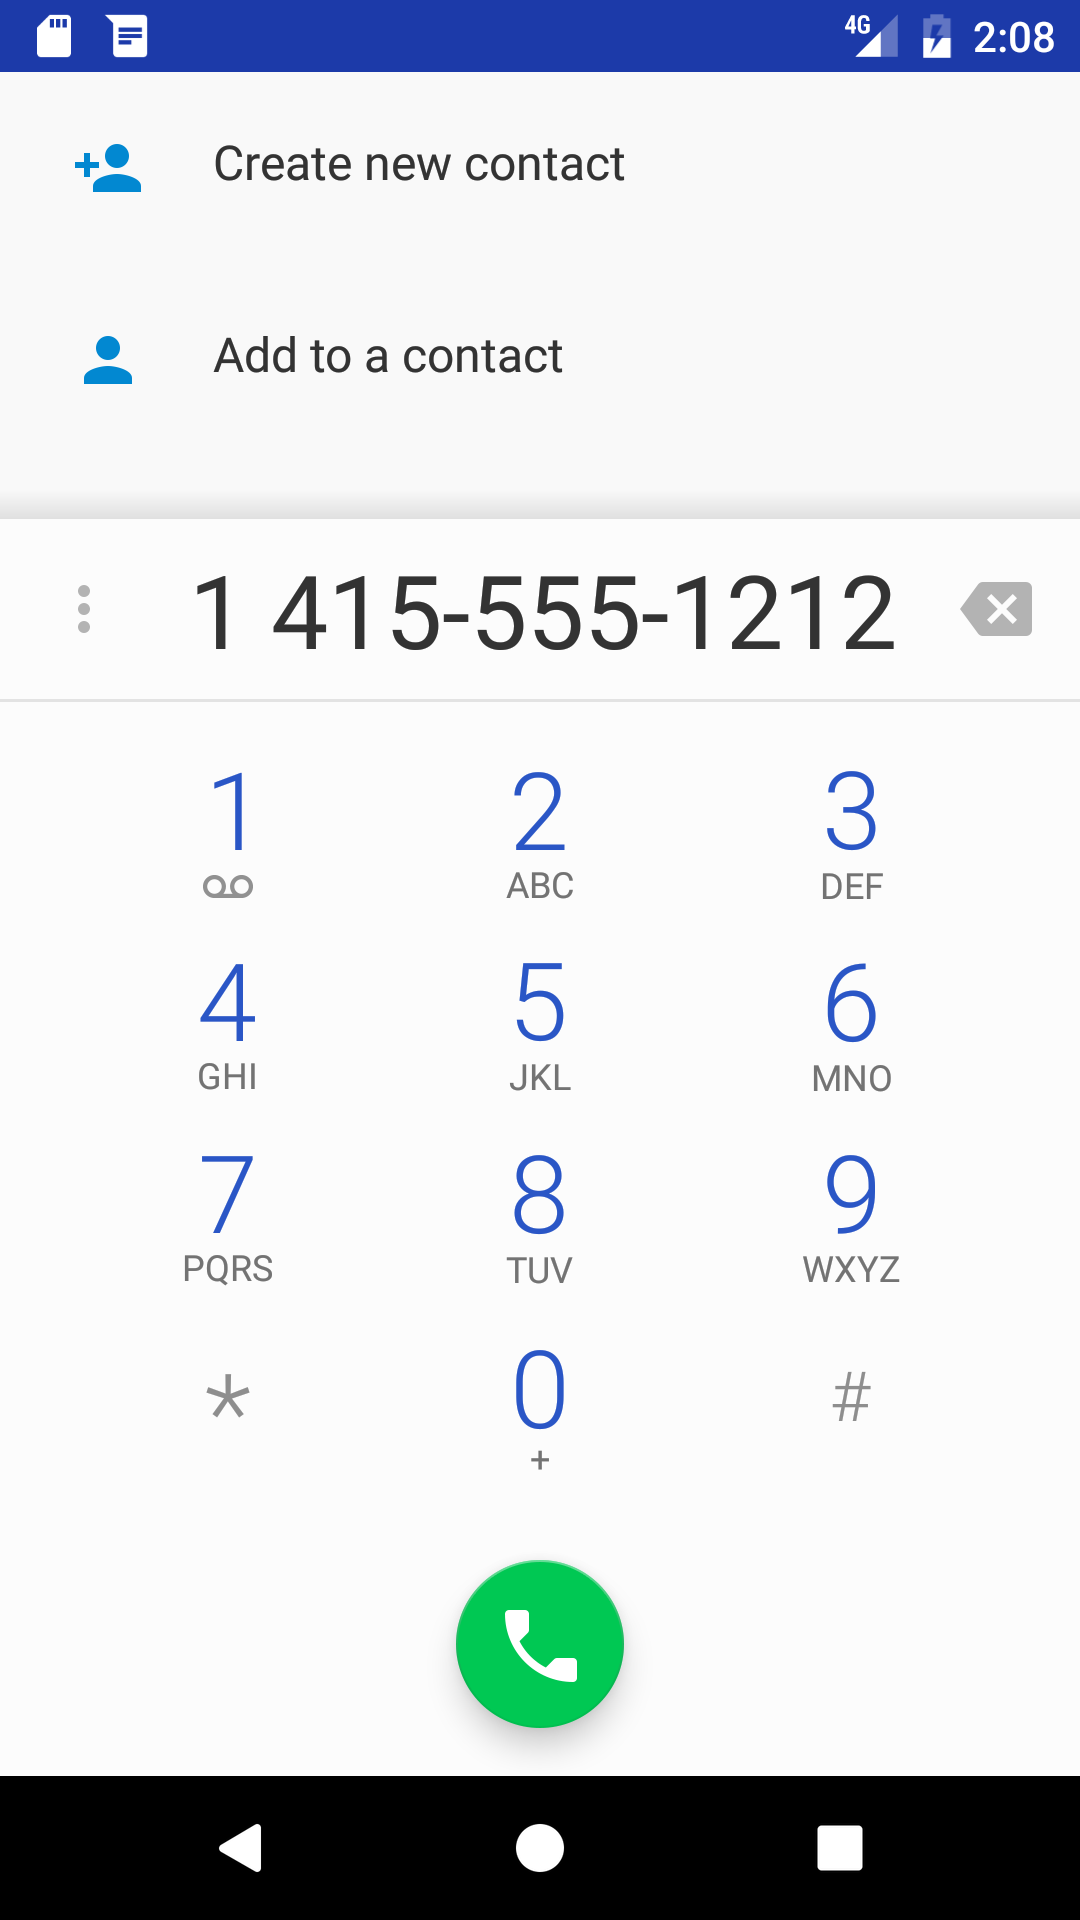 The dialer in the Phone app shows the phone number from the intent